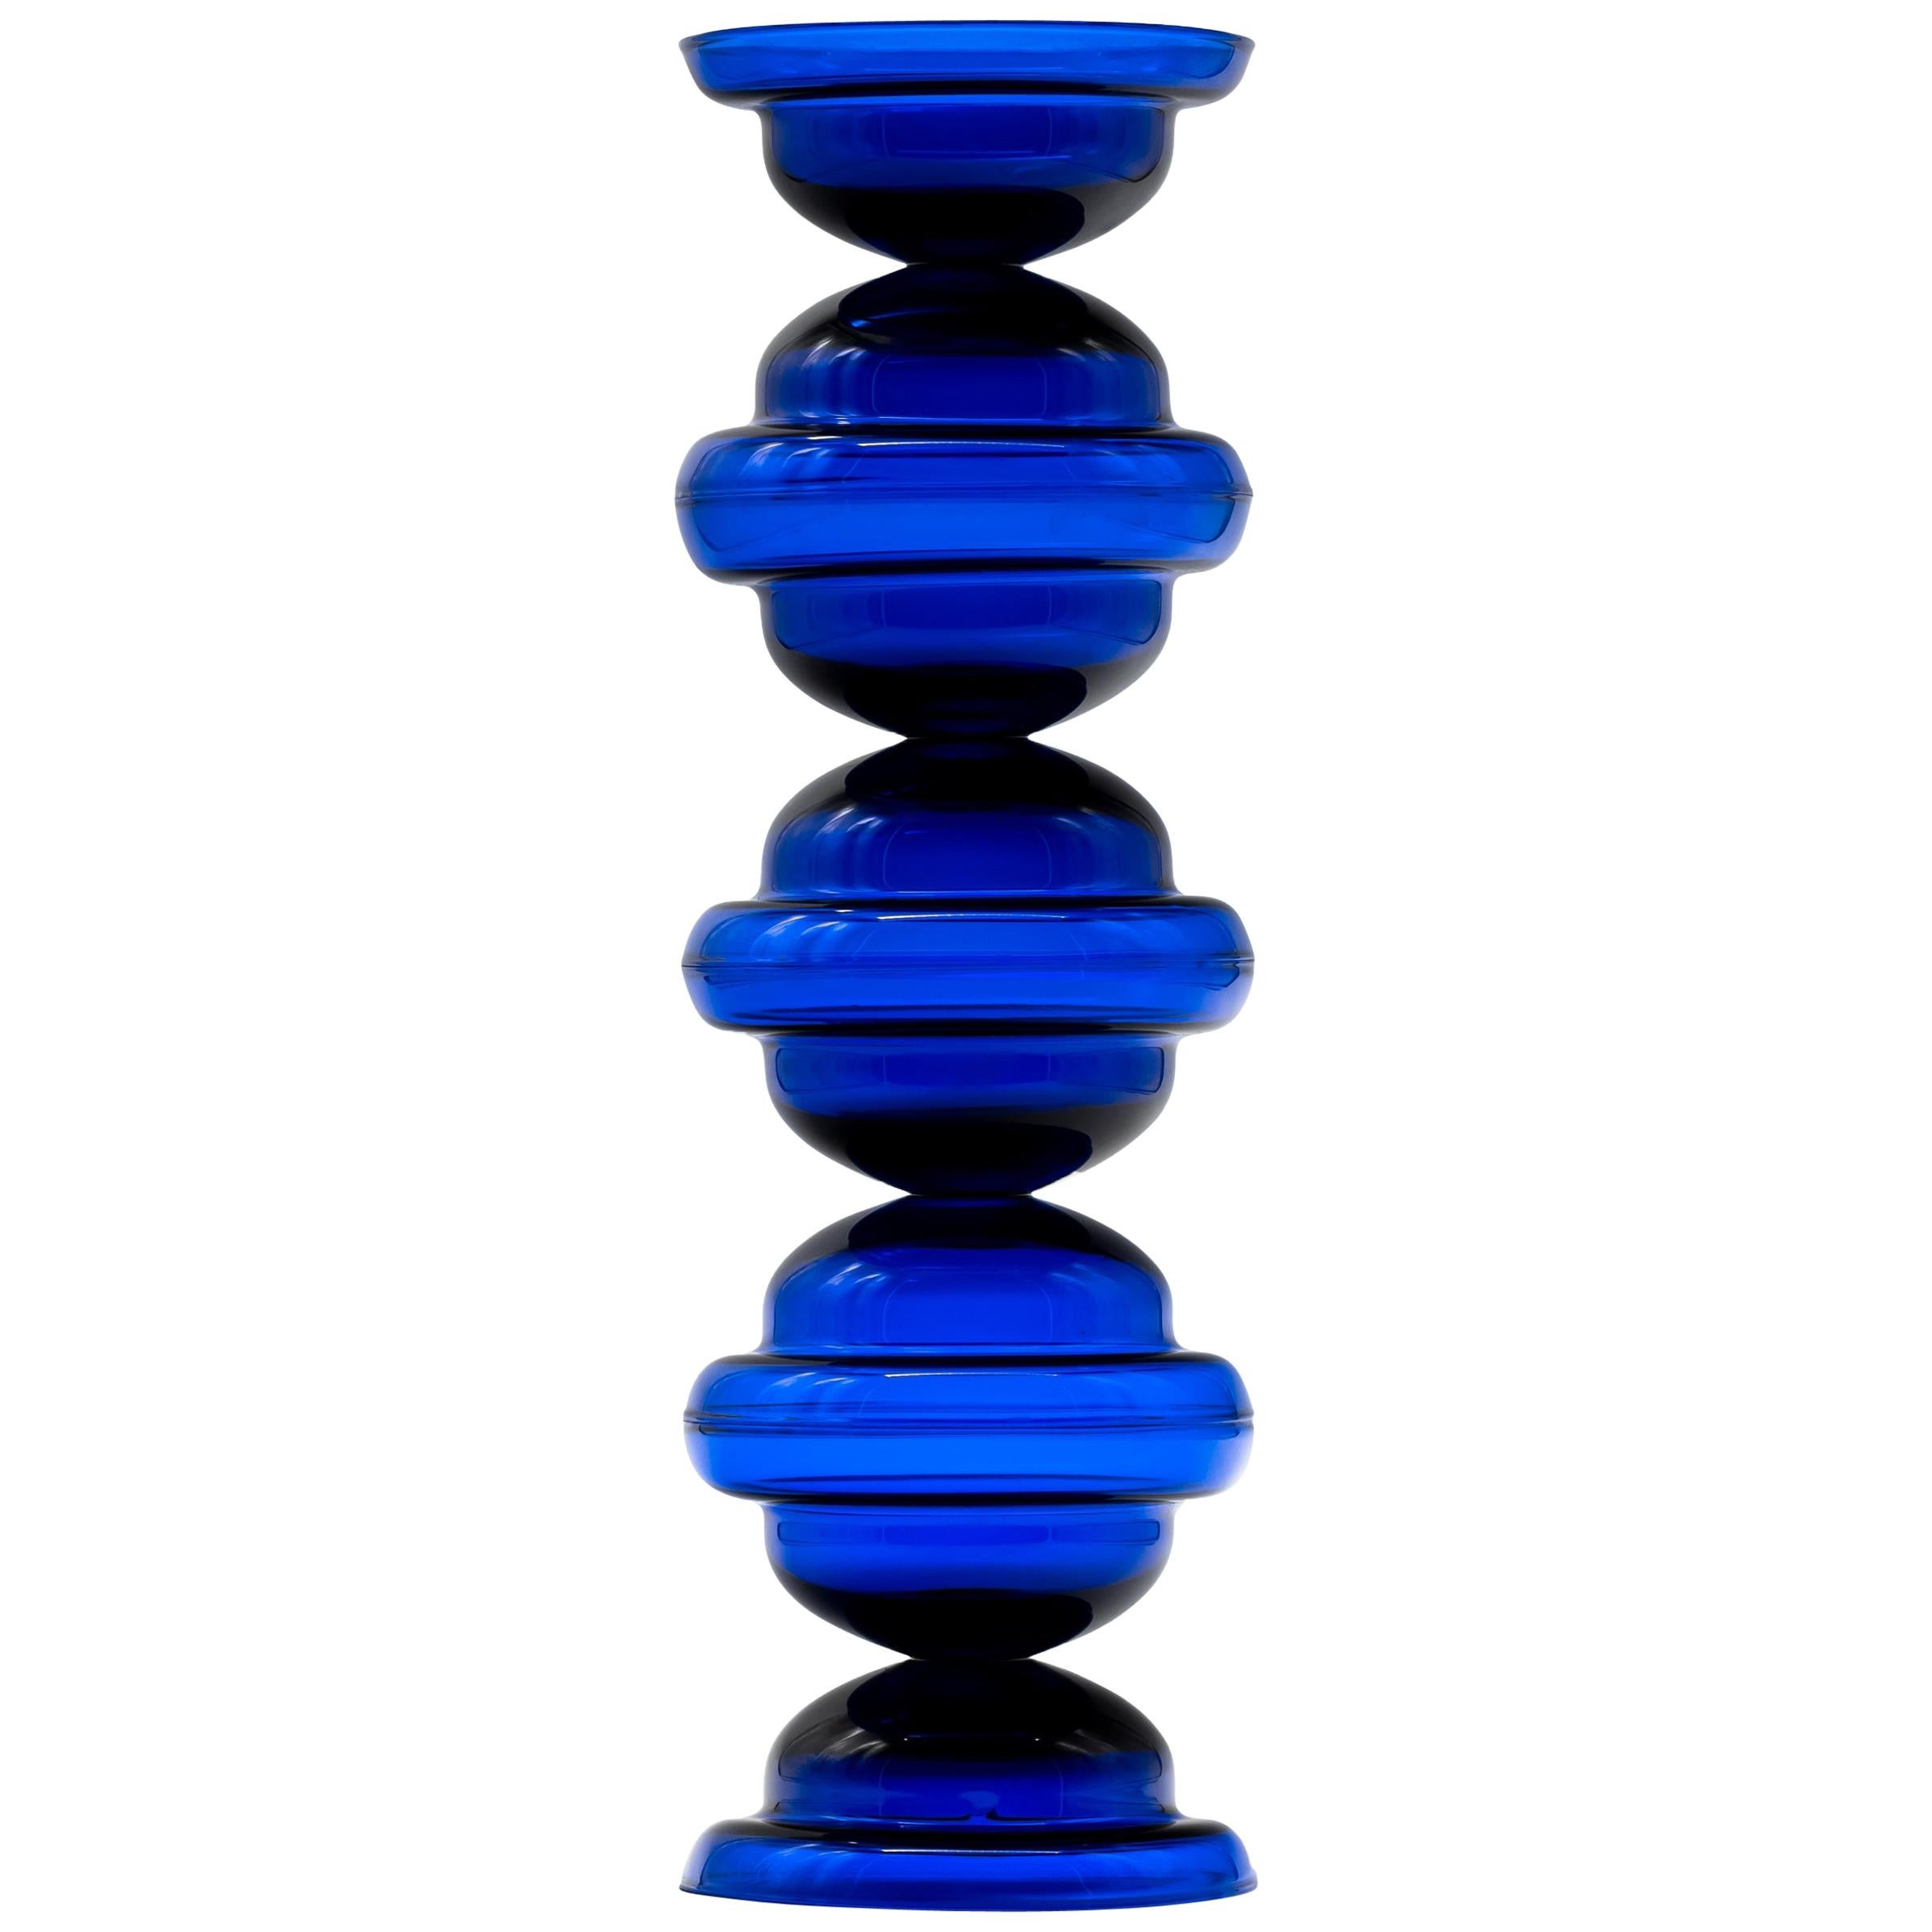 Candleholder in blue glass